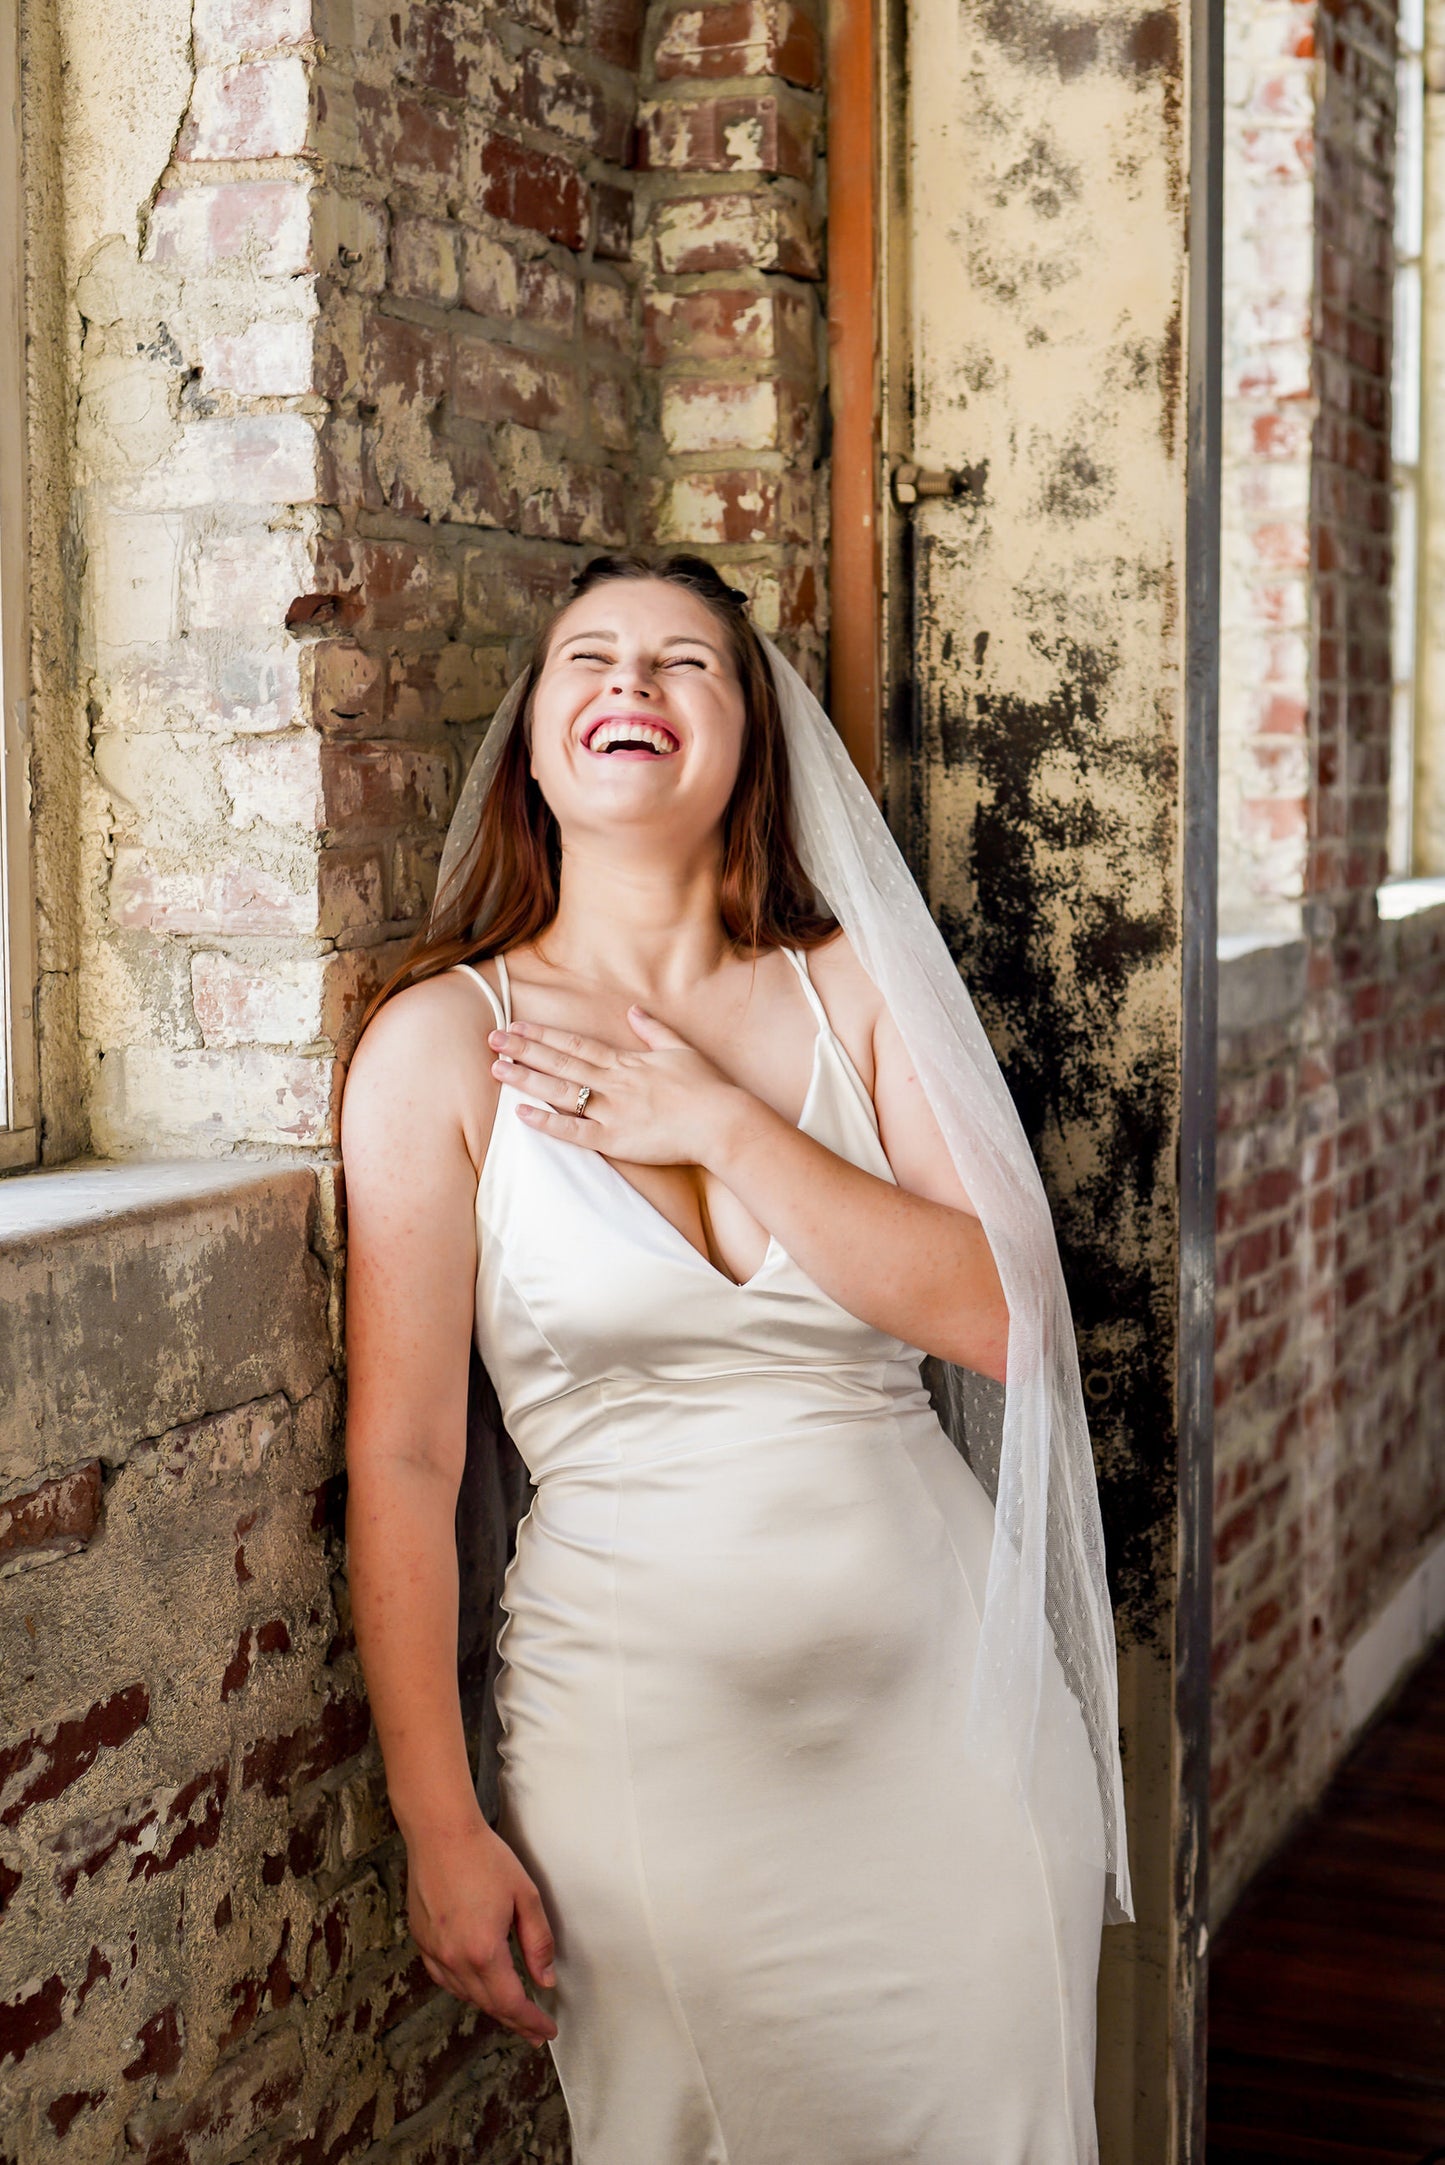 modern bride in ivory bridal veil with polka dots in a romantic industrial red brick venue